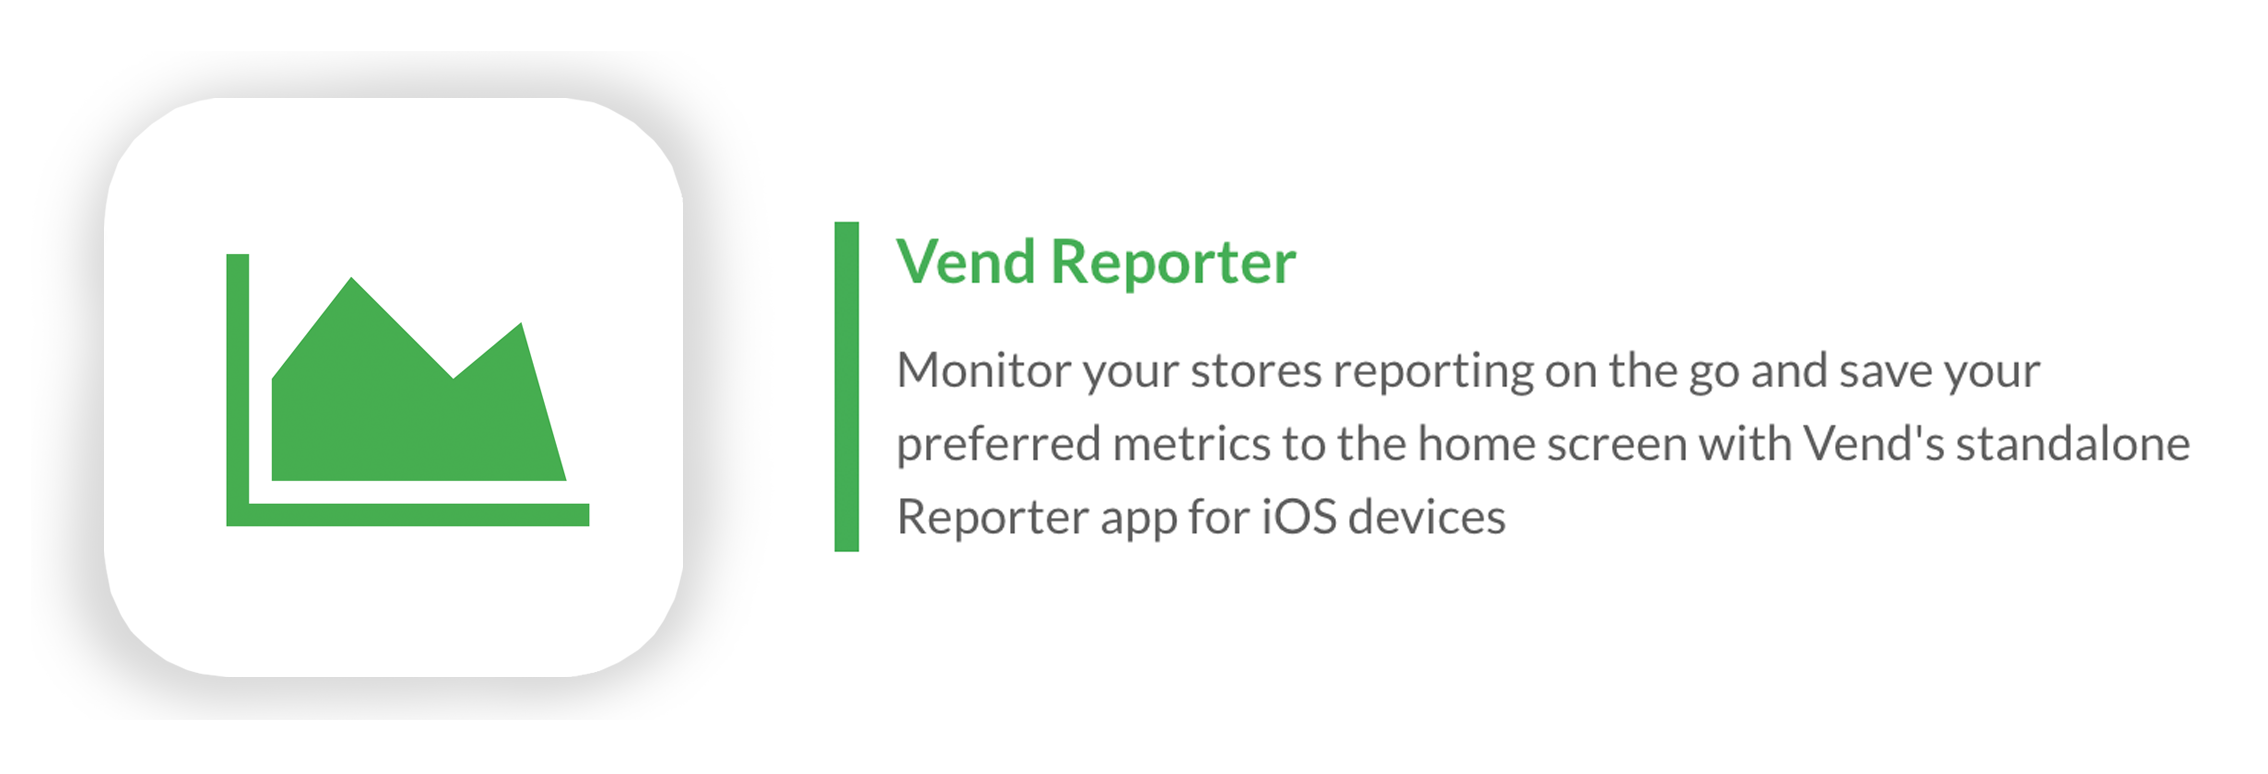 Vend_Reporter.png